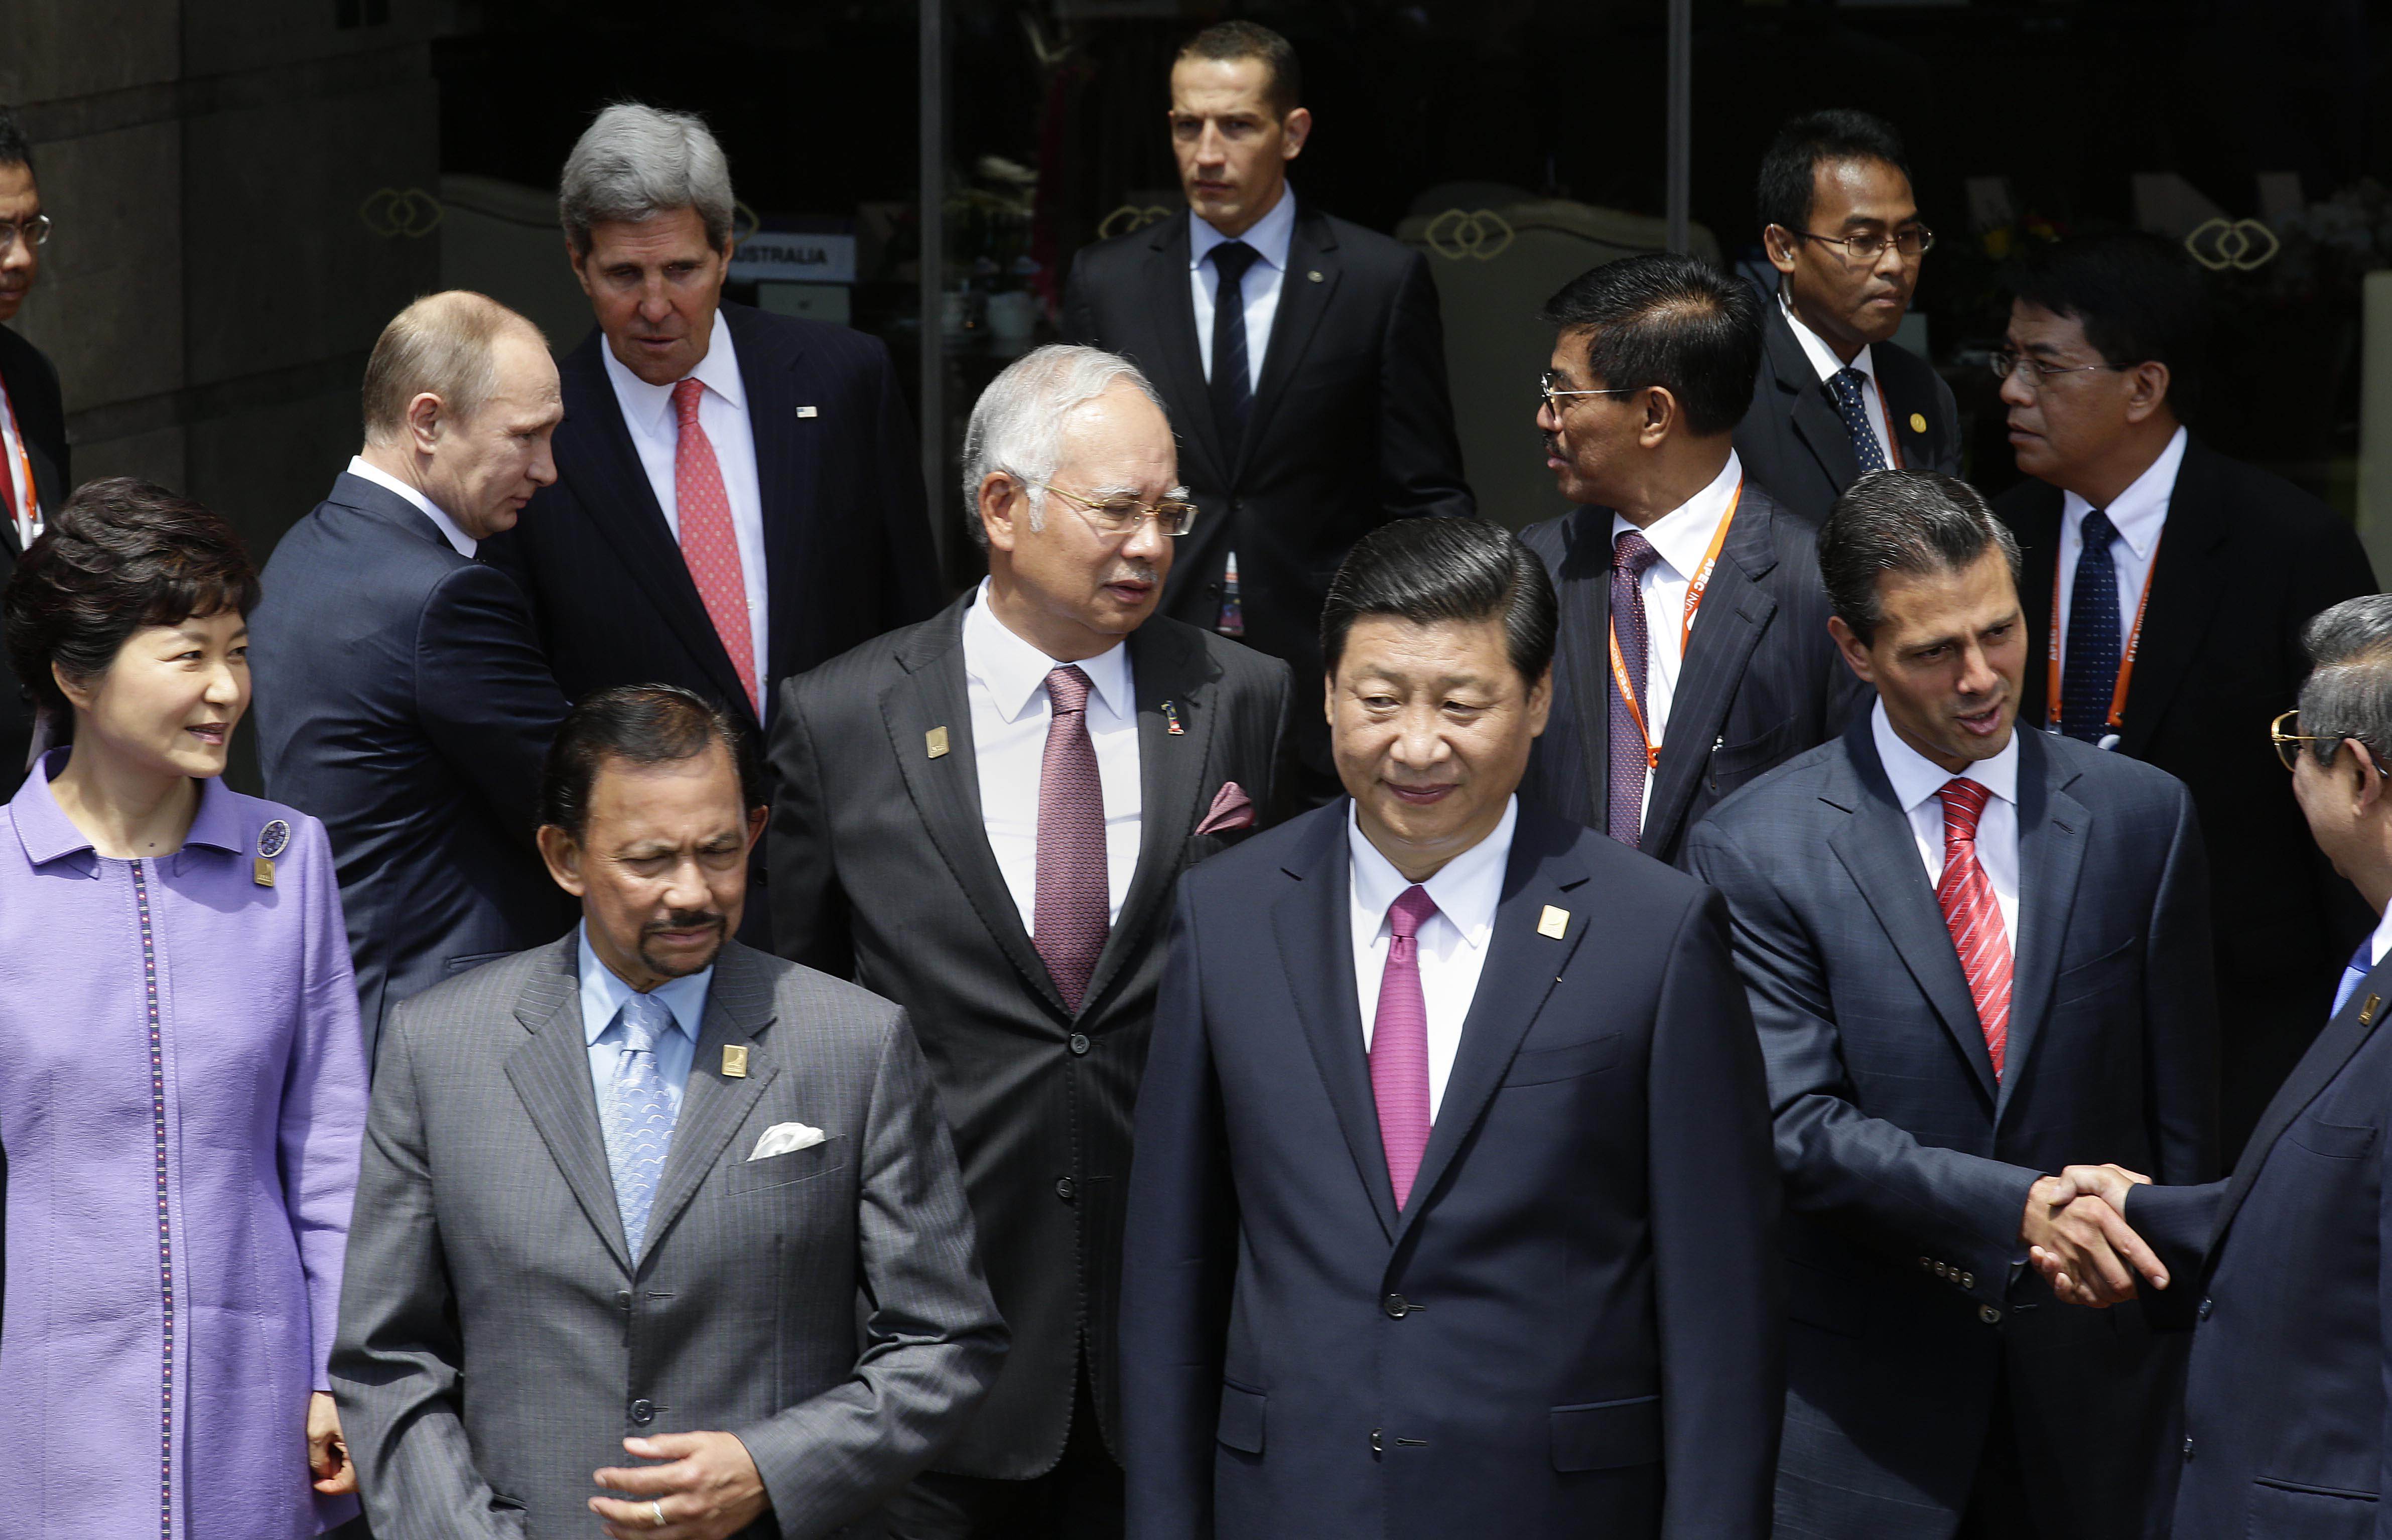 Xi Jinping joins world leaders for a photoshoot on the final day of the Apec summit in Bali. Photo: AFP